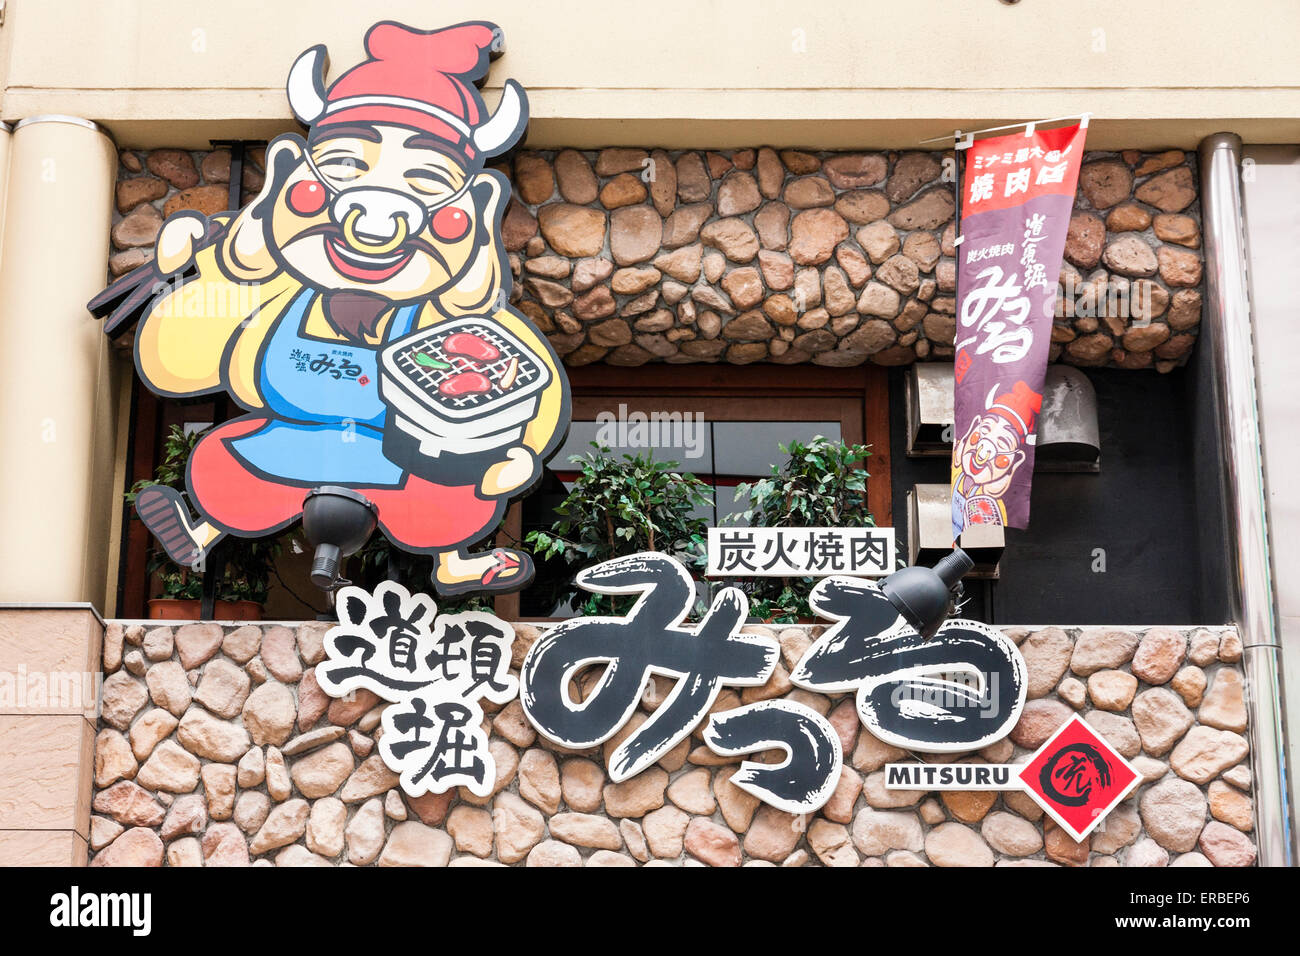 Balcony of the Yakiniku Mirru with the large logo sign featuring a laughing walking dressed pig carrying a small coal barbecue box. Stock Photo